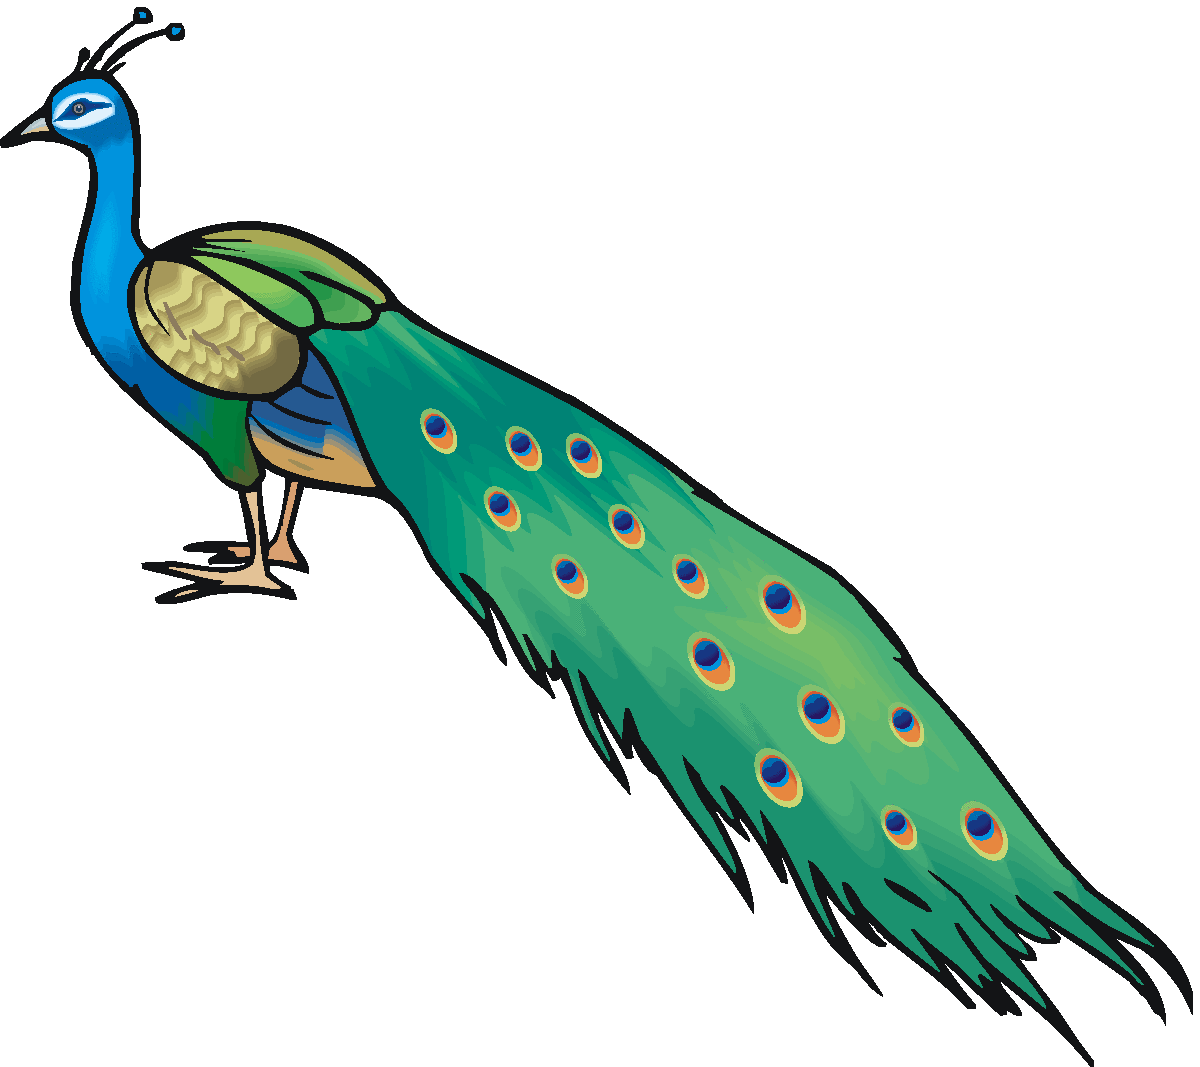 Peacock Feathers | Clipart Panda - Free Clipart Images